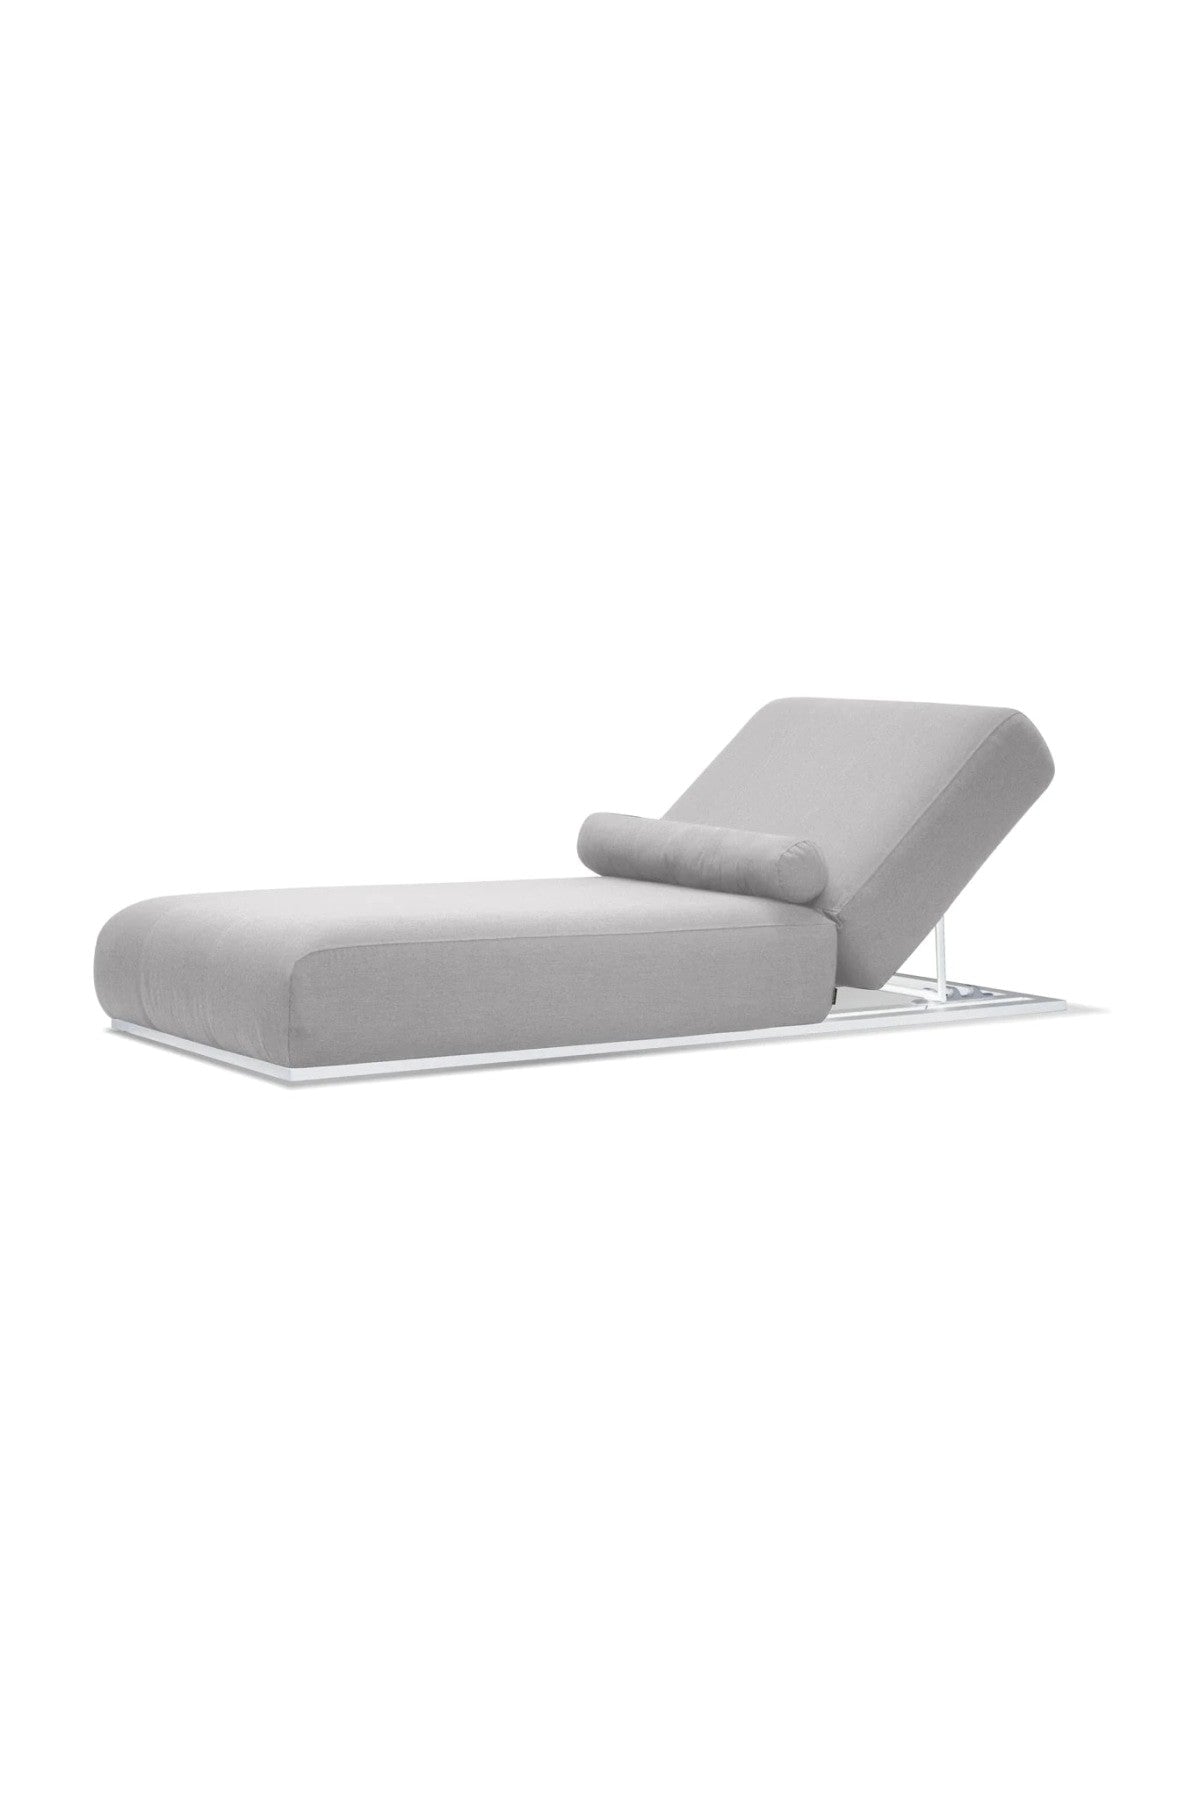 Bondy Outdoor Chaise Lounge - Silver Grey